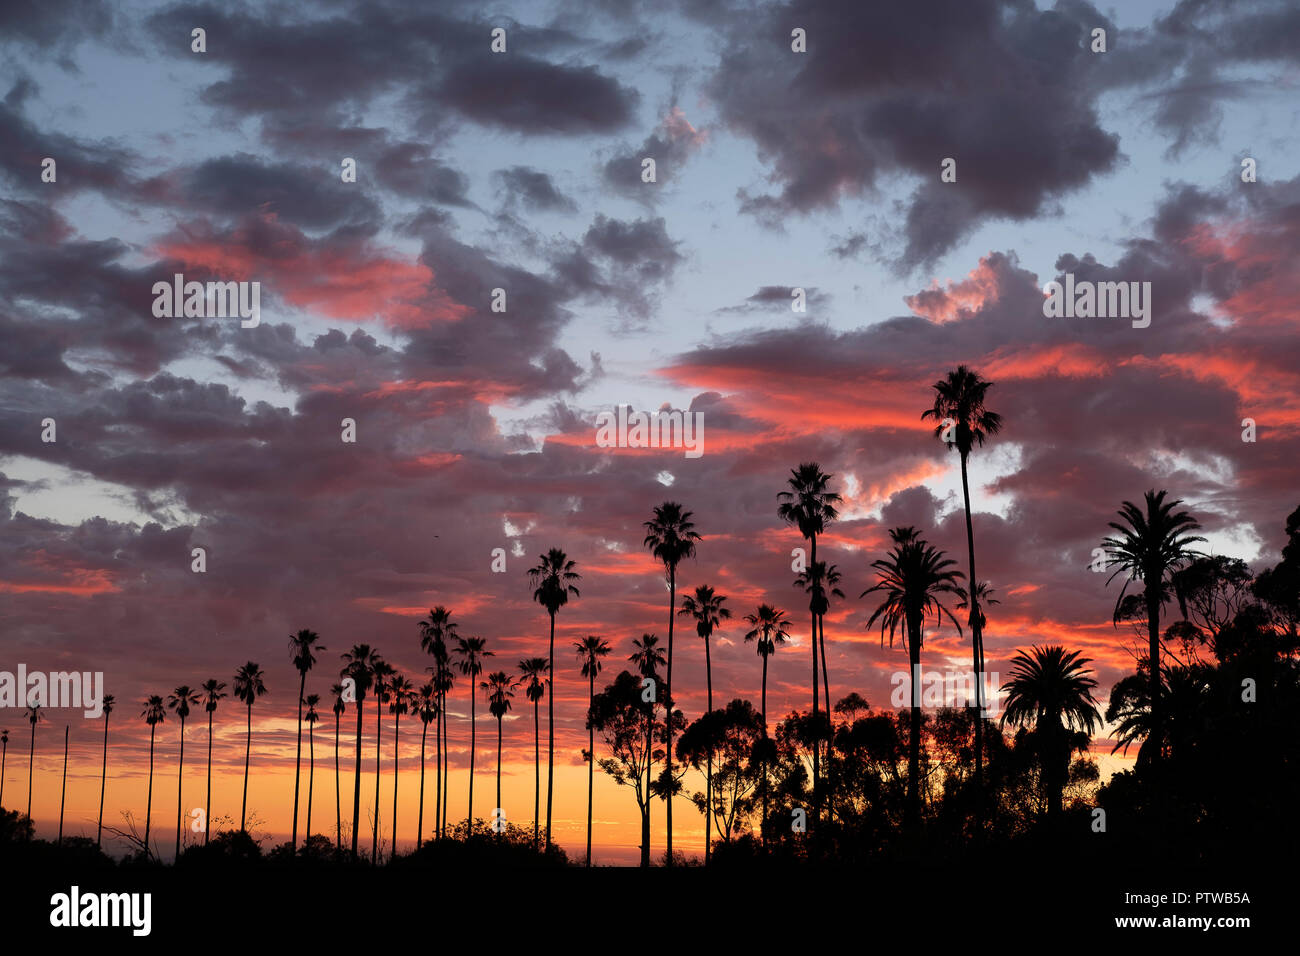 Sunset over palm trees in Elysian Park Los Angeles Stock Photo